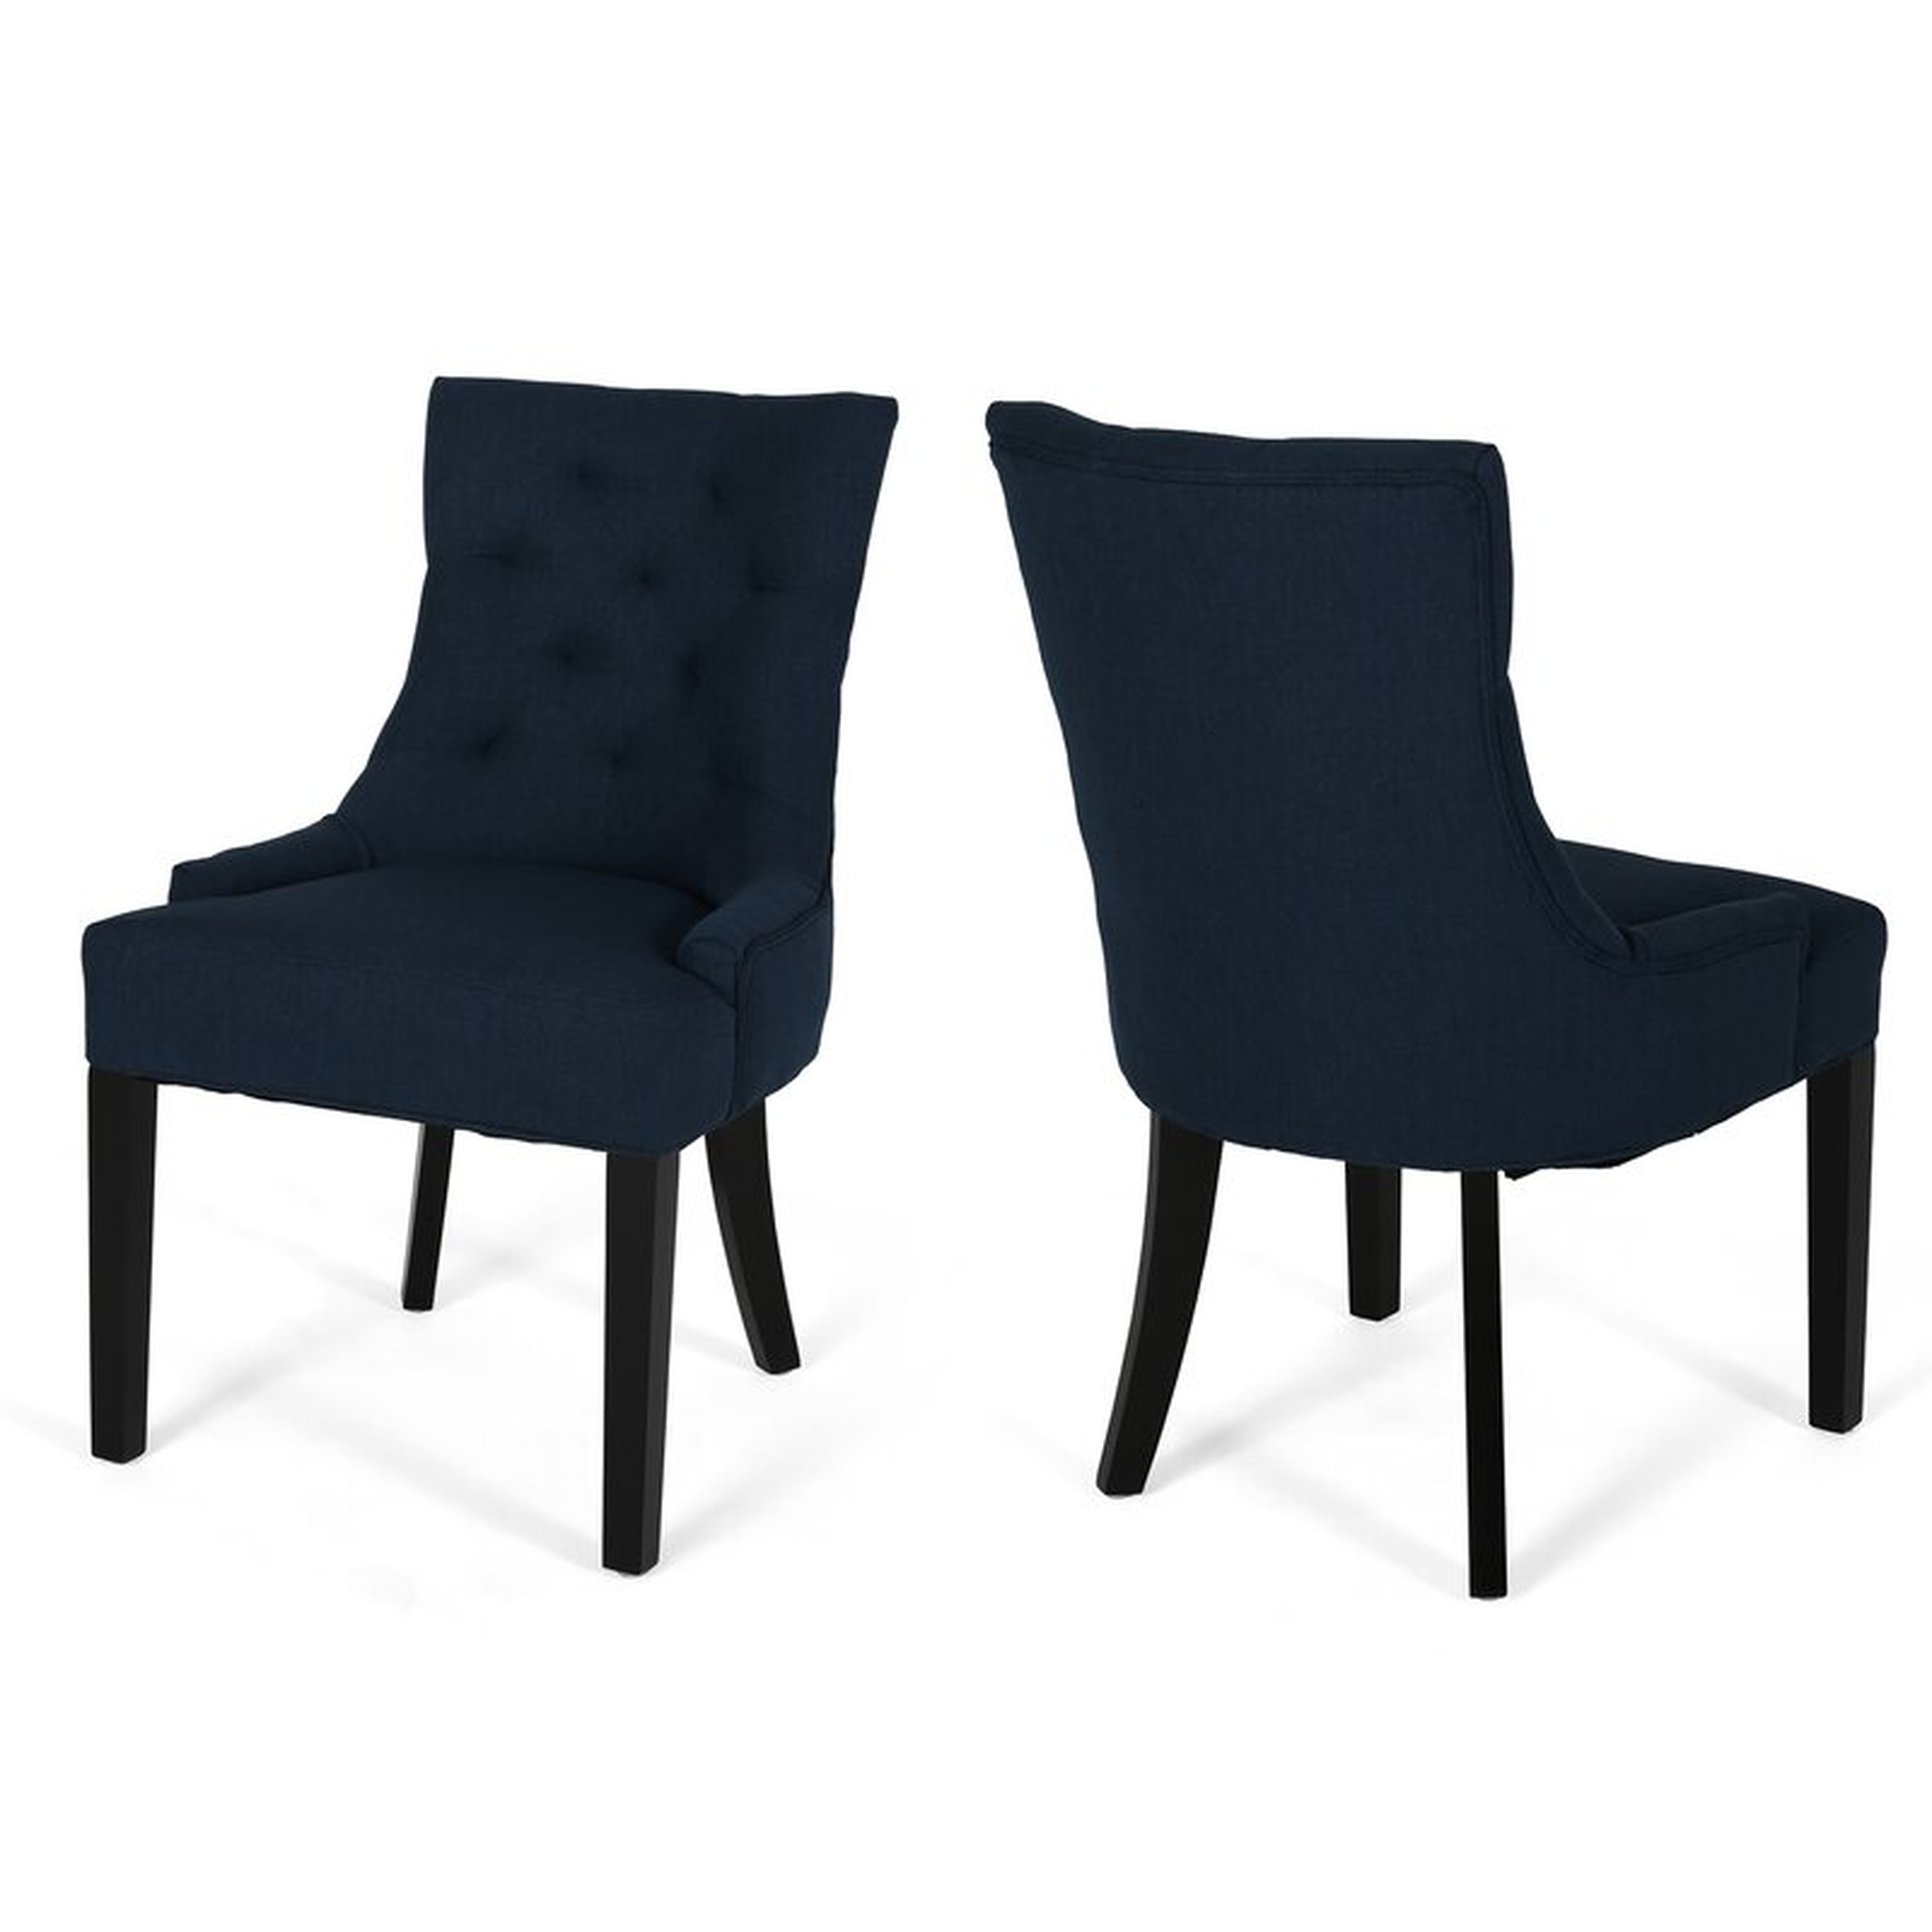 Grandview Tufted Upholstered Side Chair (Set of 2) - Wayfair